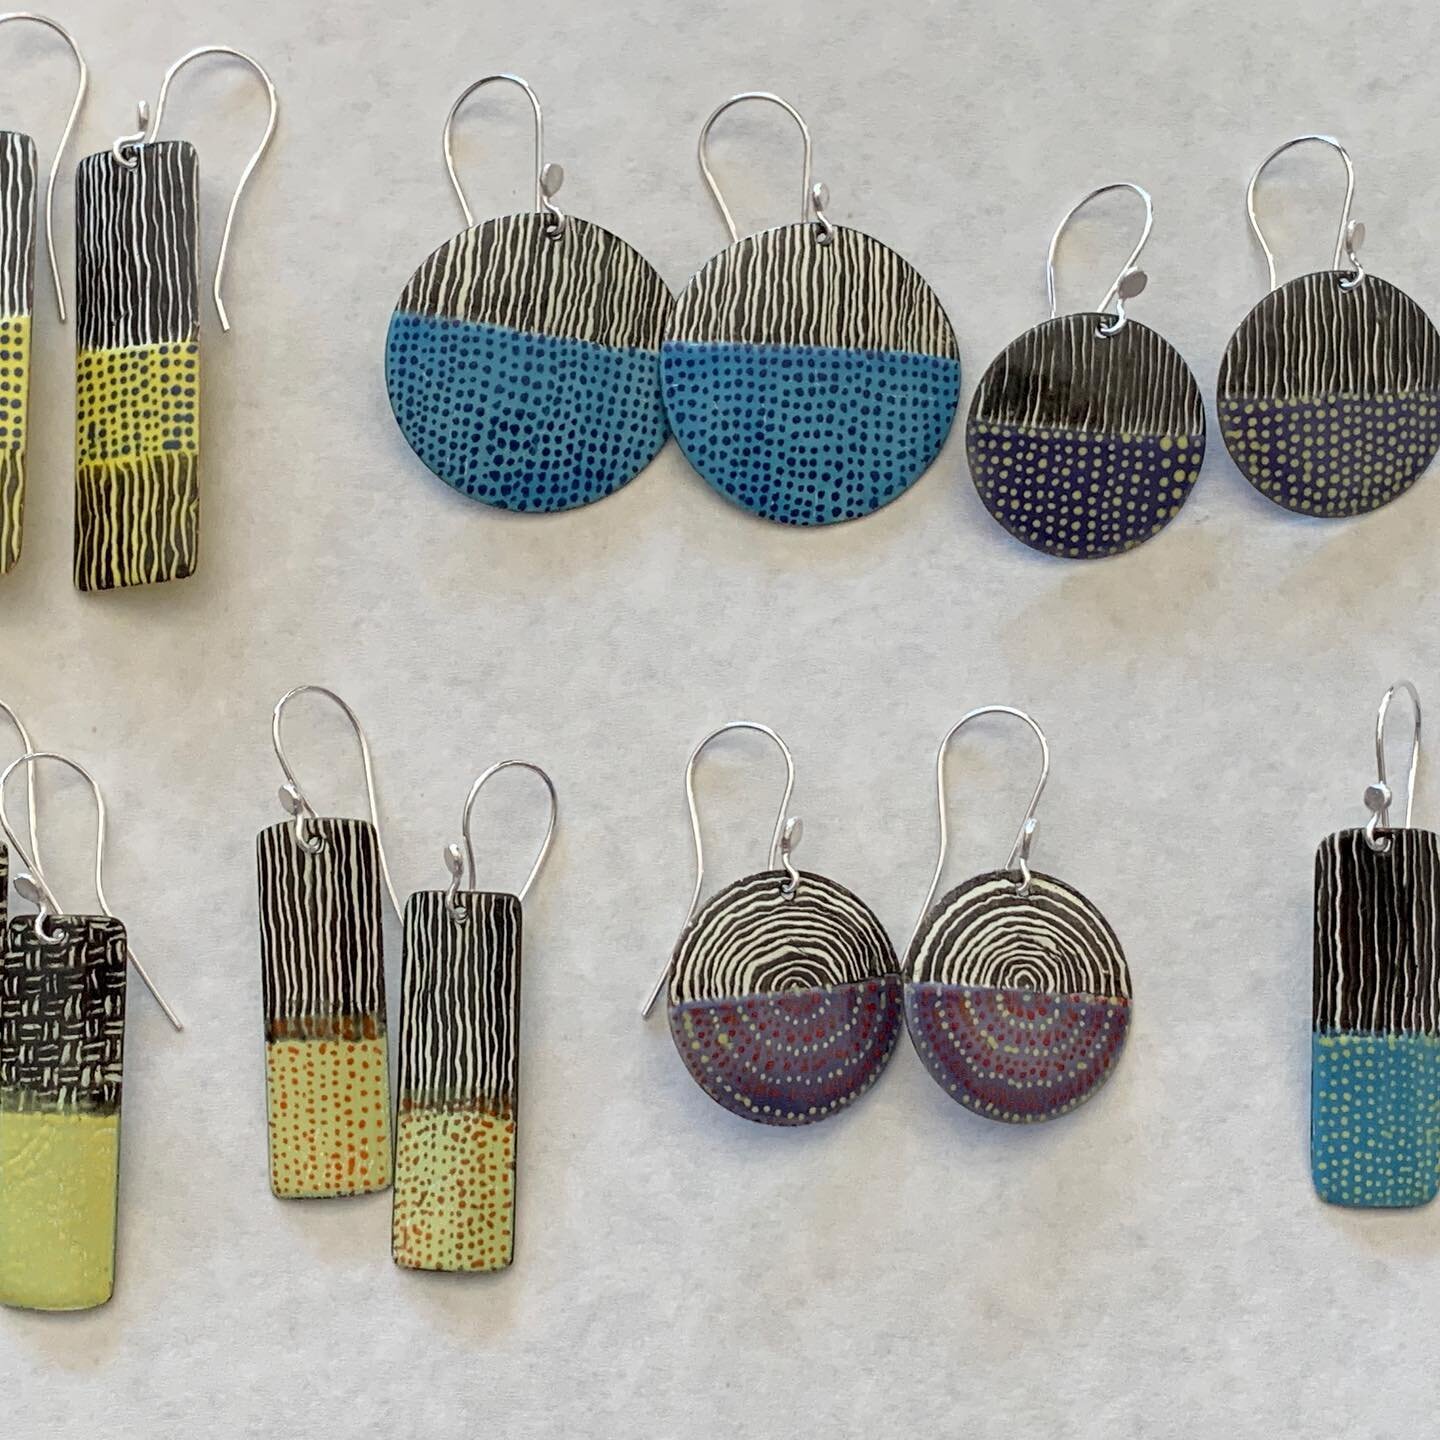 I have been having so much fun after taking Tanya Crane&rsquo;s Zoom workshop on liquid enamels. Love playing with color and pattern!

#enamels 
#enamelearrings 
#wearableart
#artisanjewelry 
#accorintidesigns